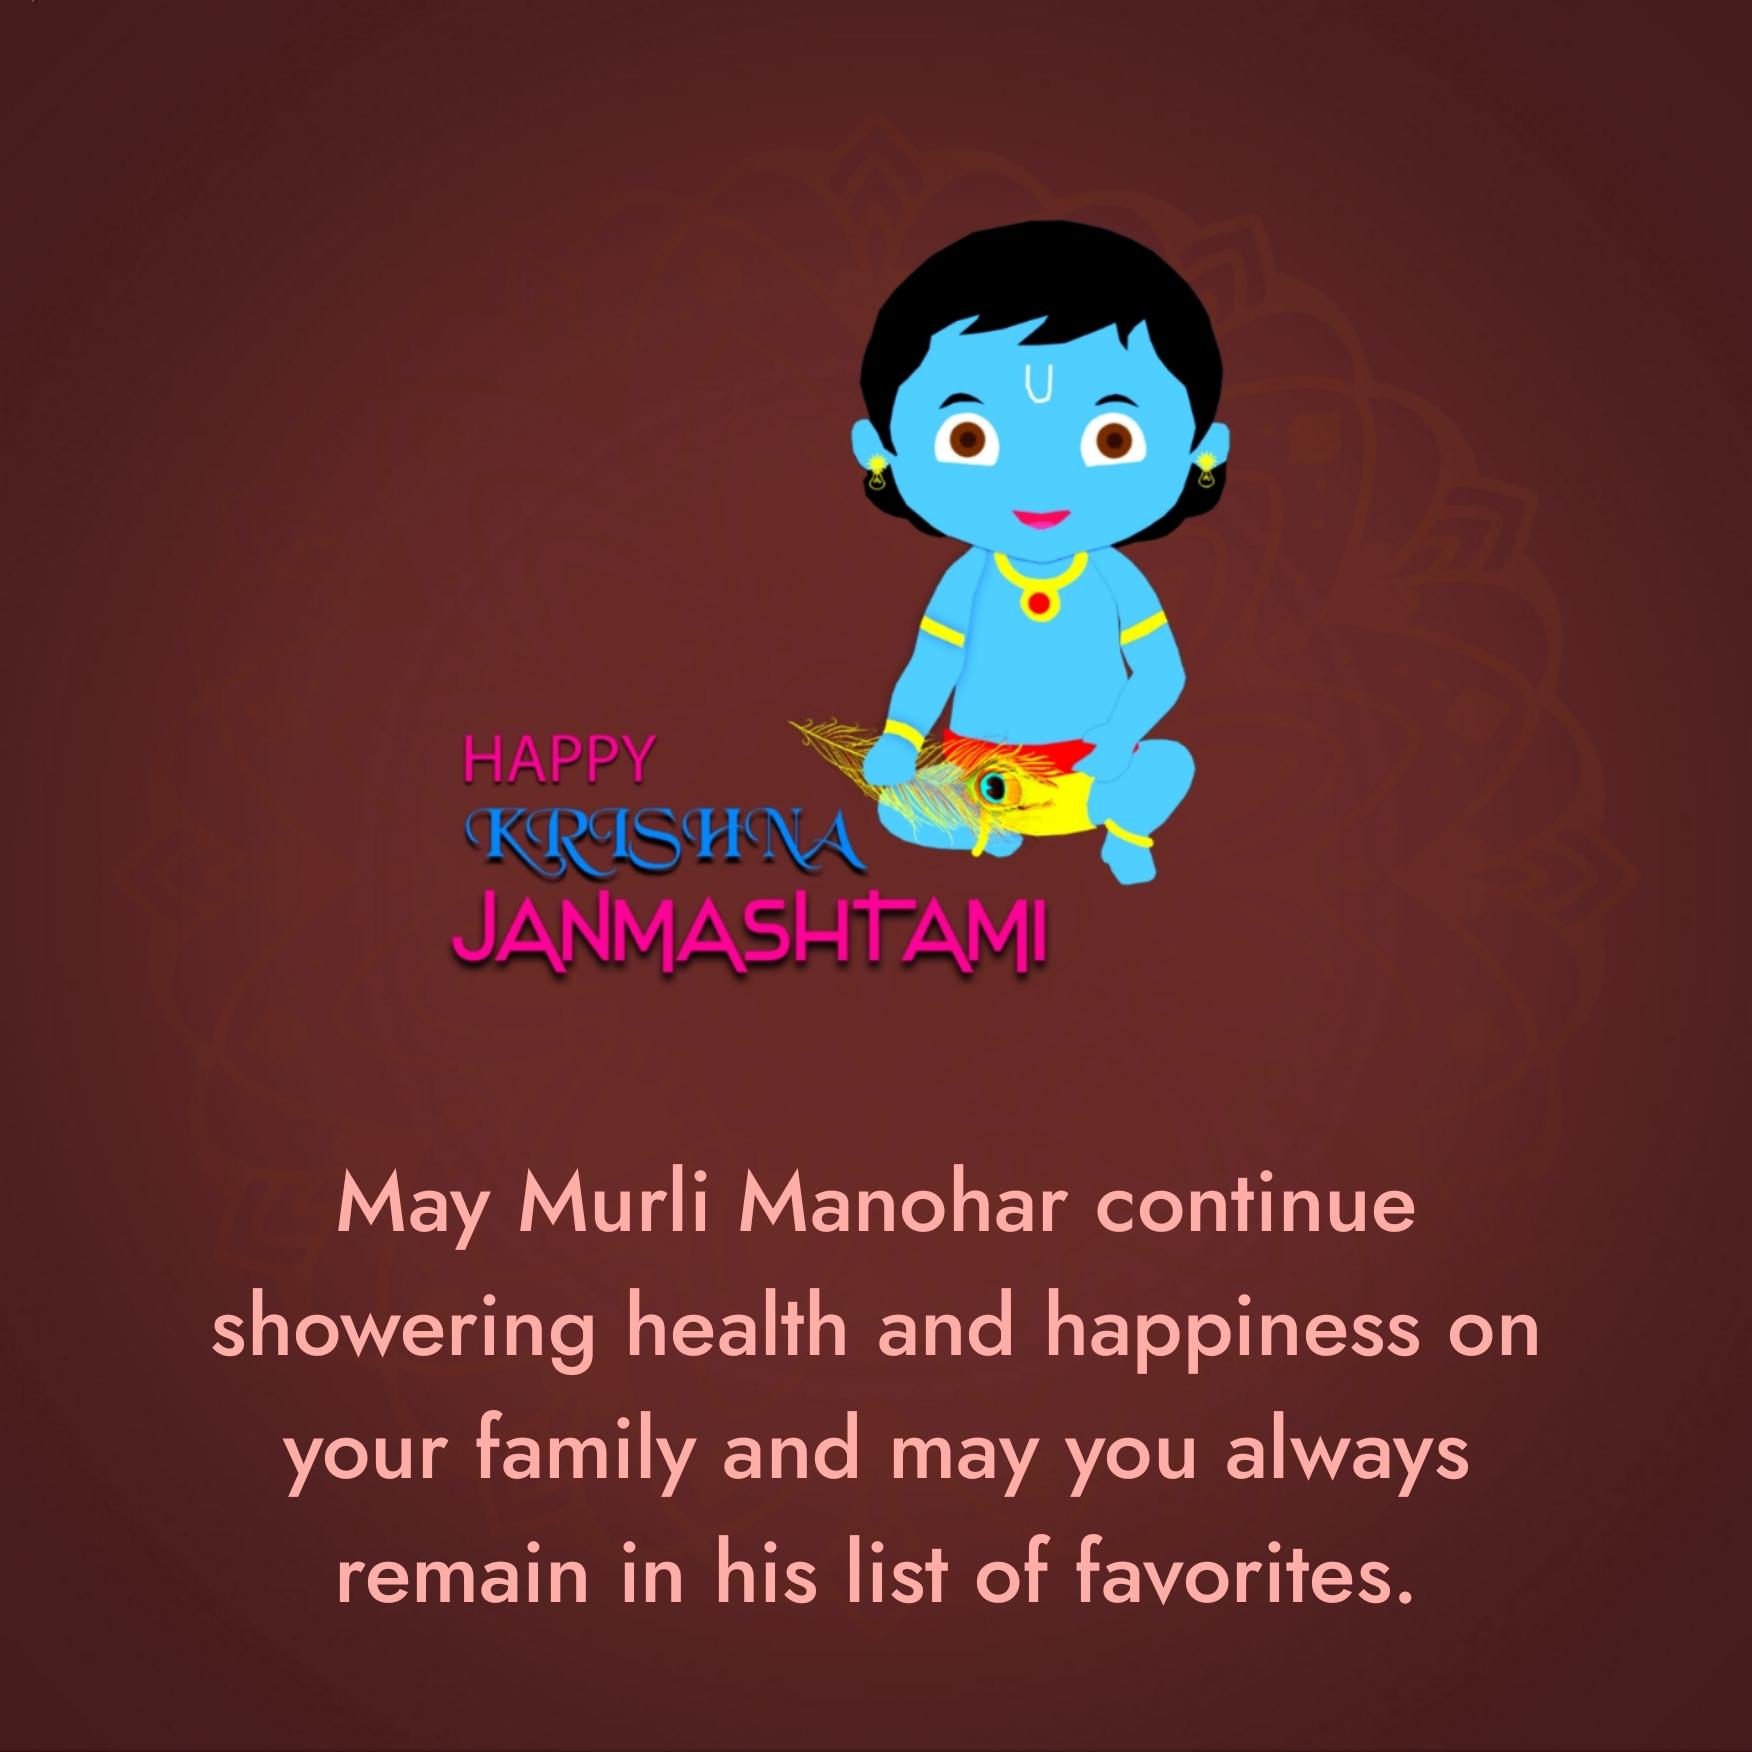 May Murli Manohar continue showering health and happiness